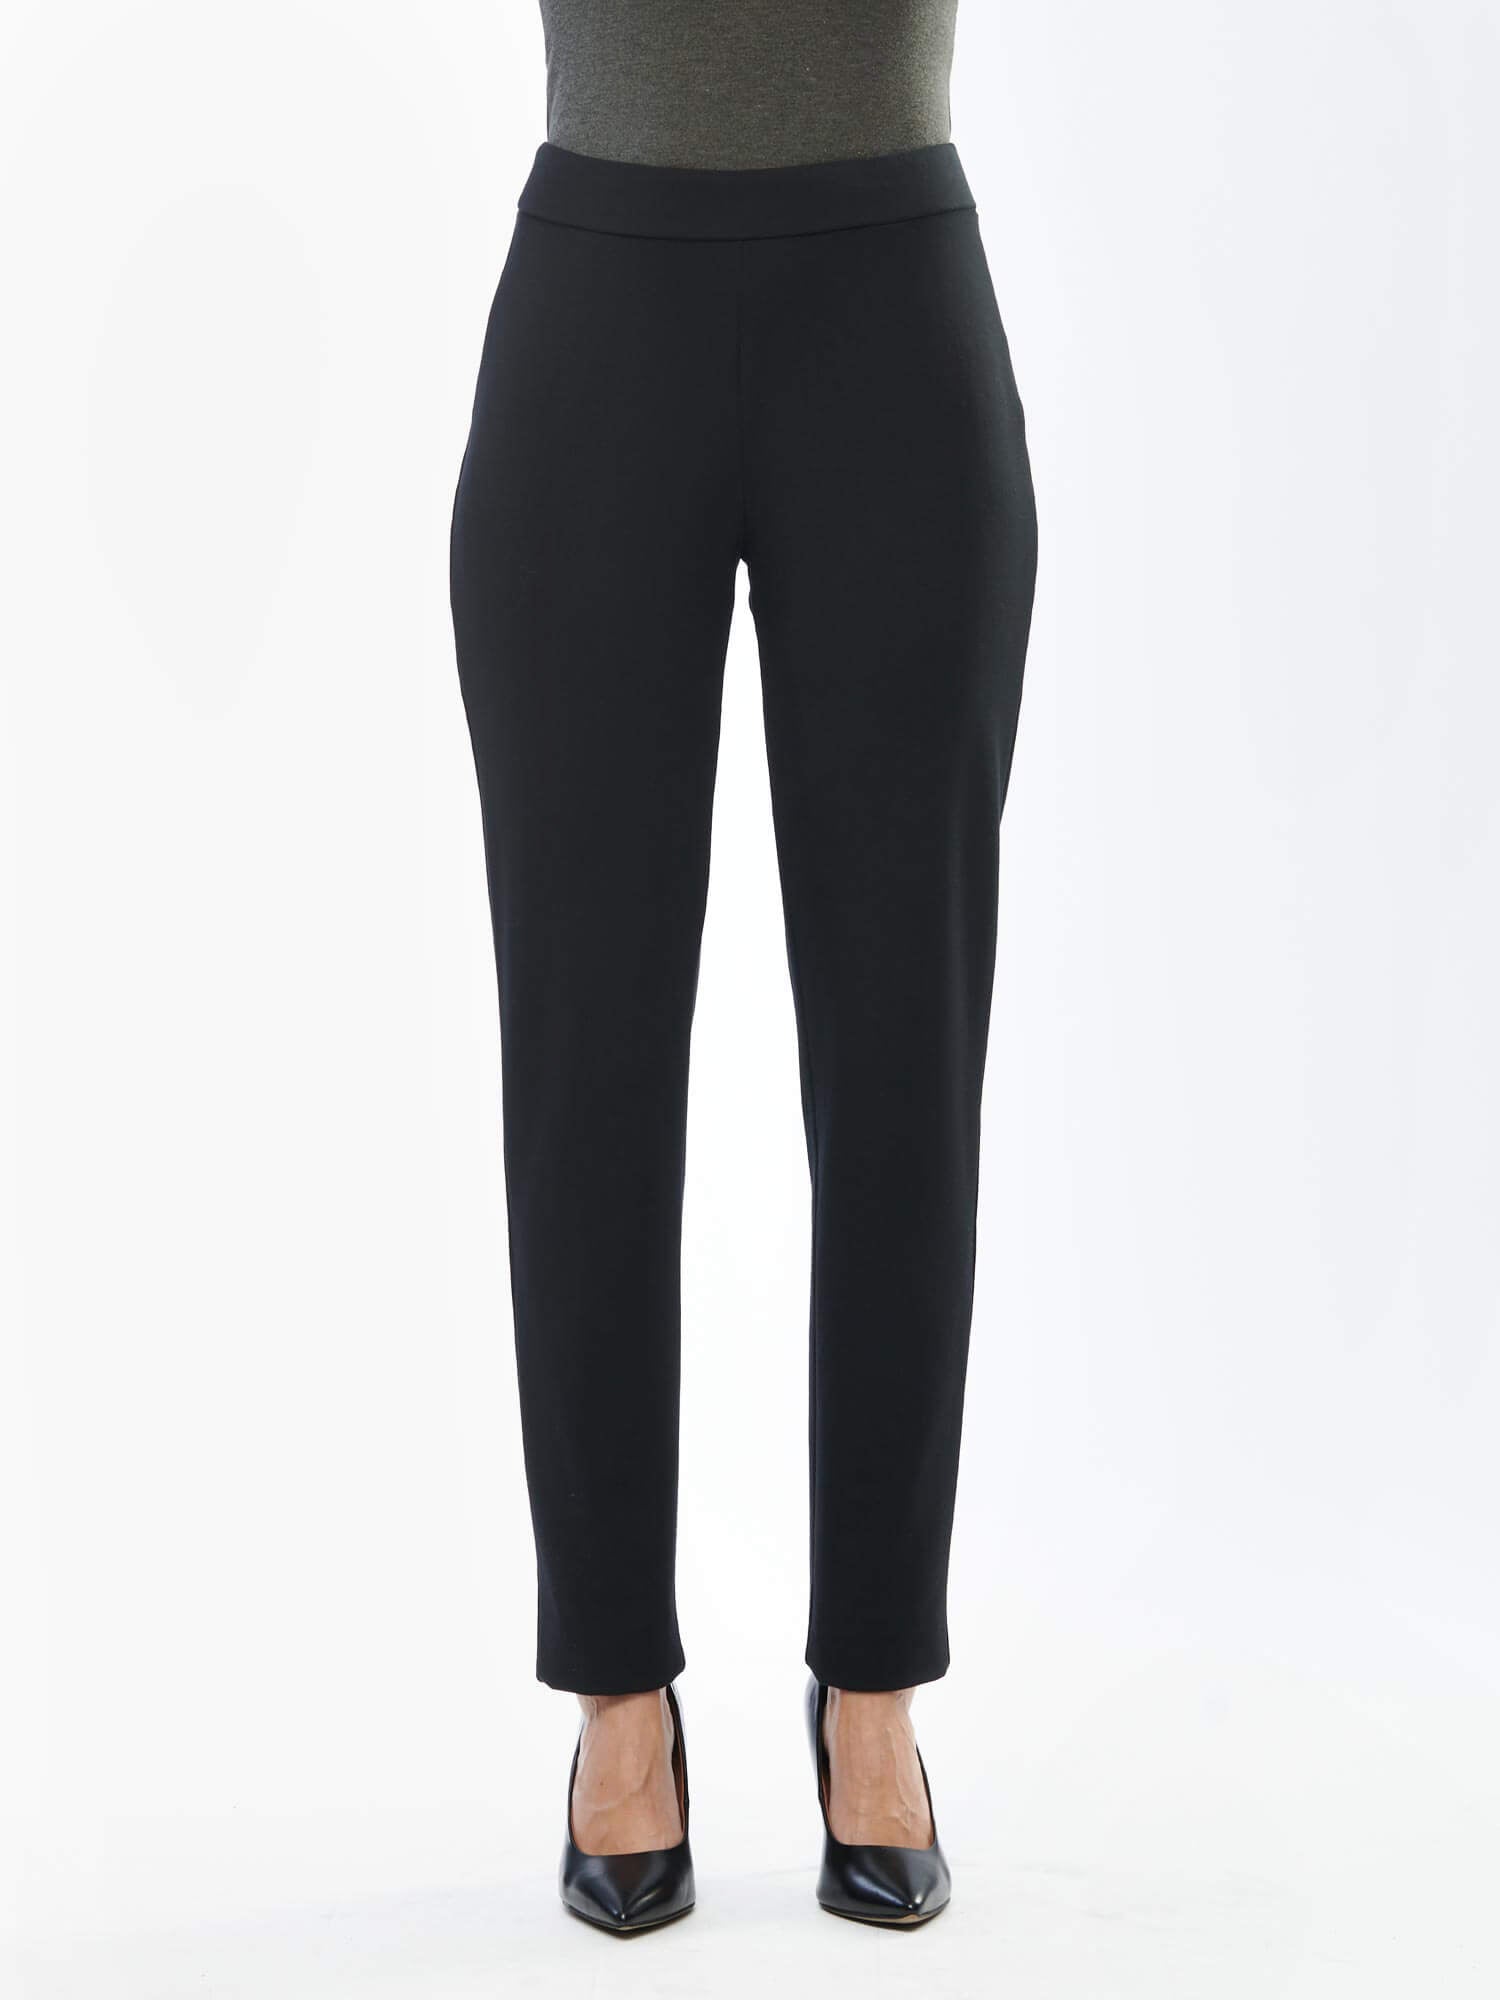 Avery pull-on pant | Sustainable women's fashion made in Canada | Miik